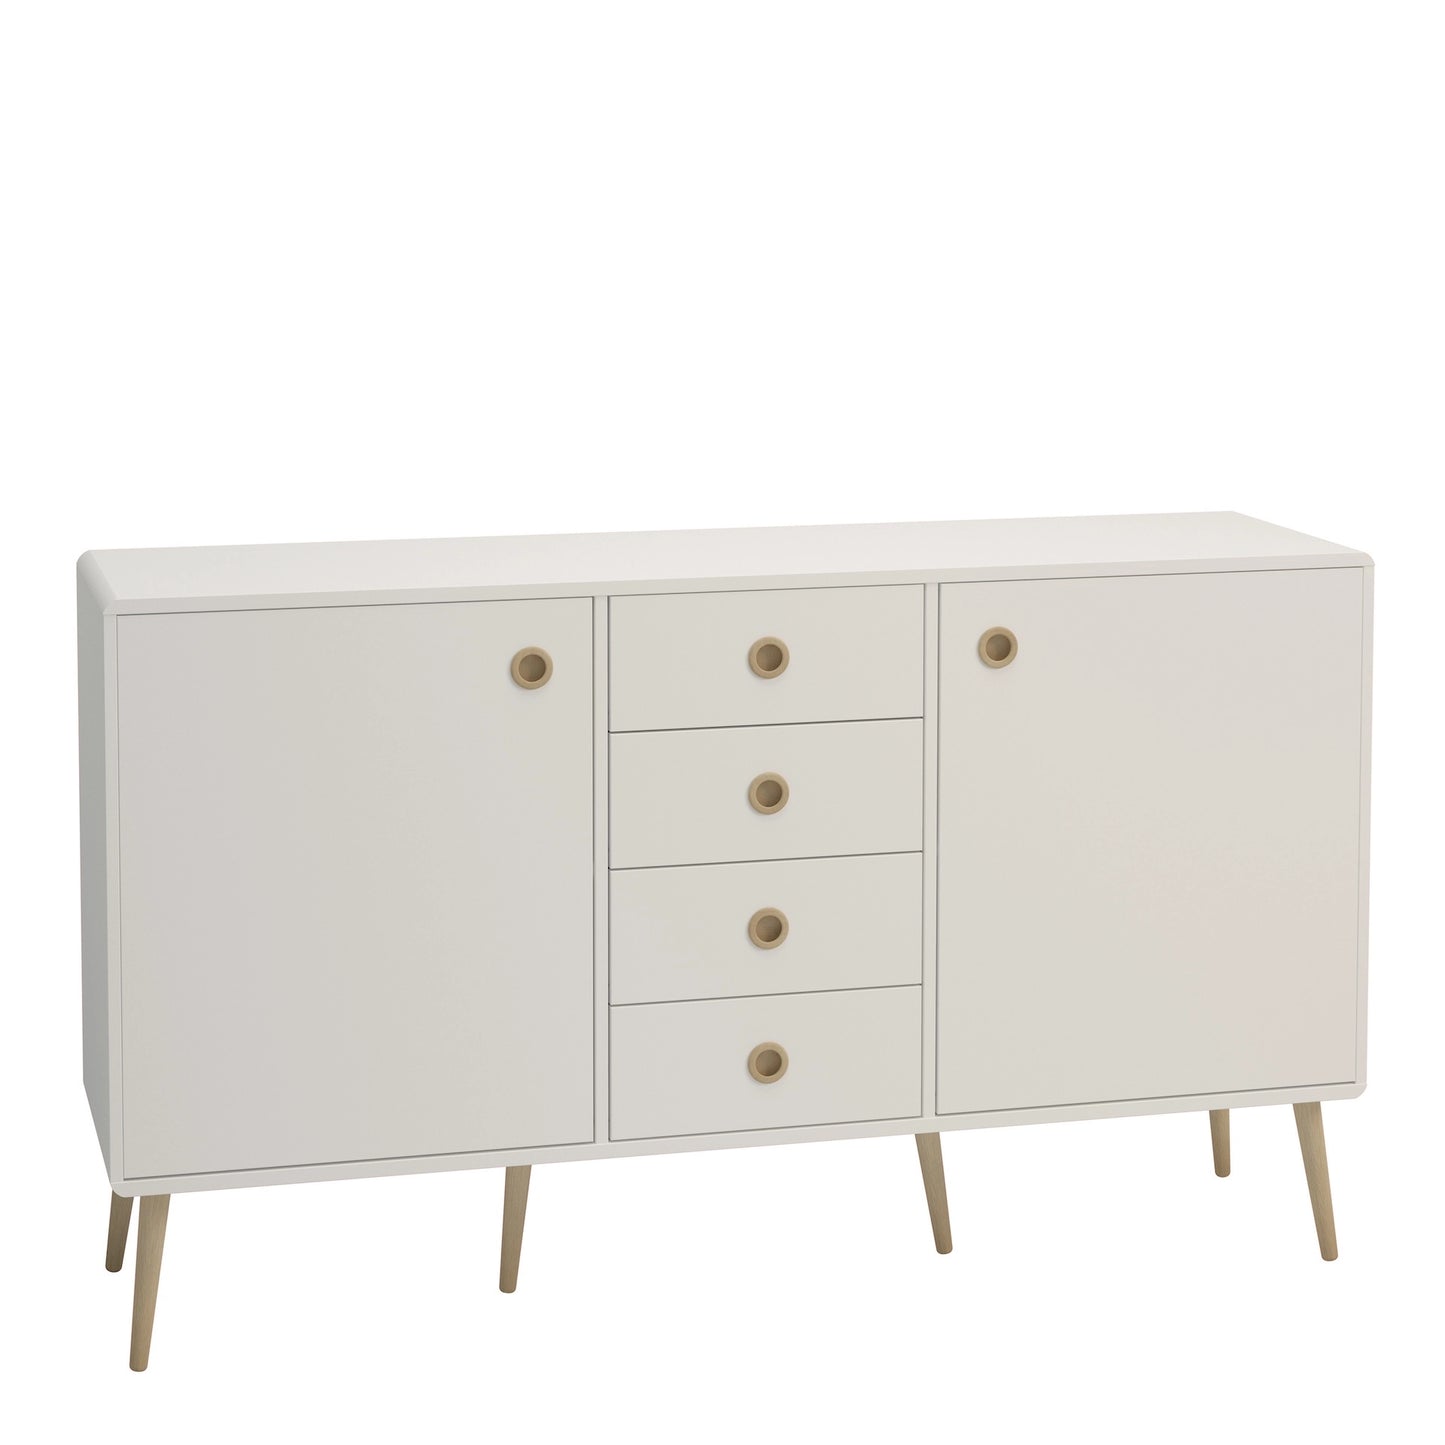 Furniture To Go Softline Sideboard 2 Doors + 4 Drawers, White 050